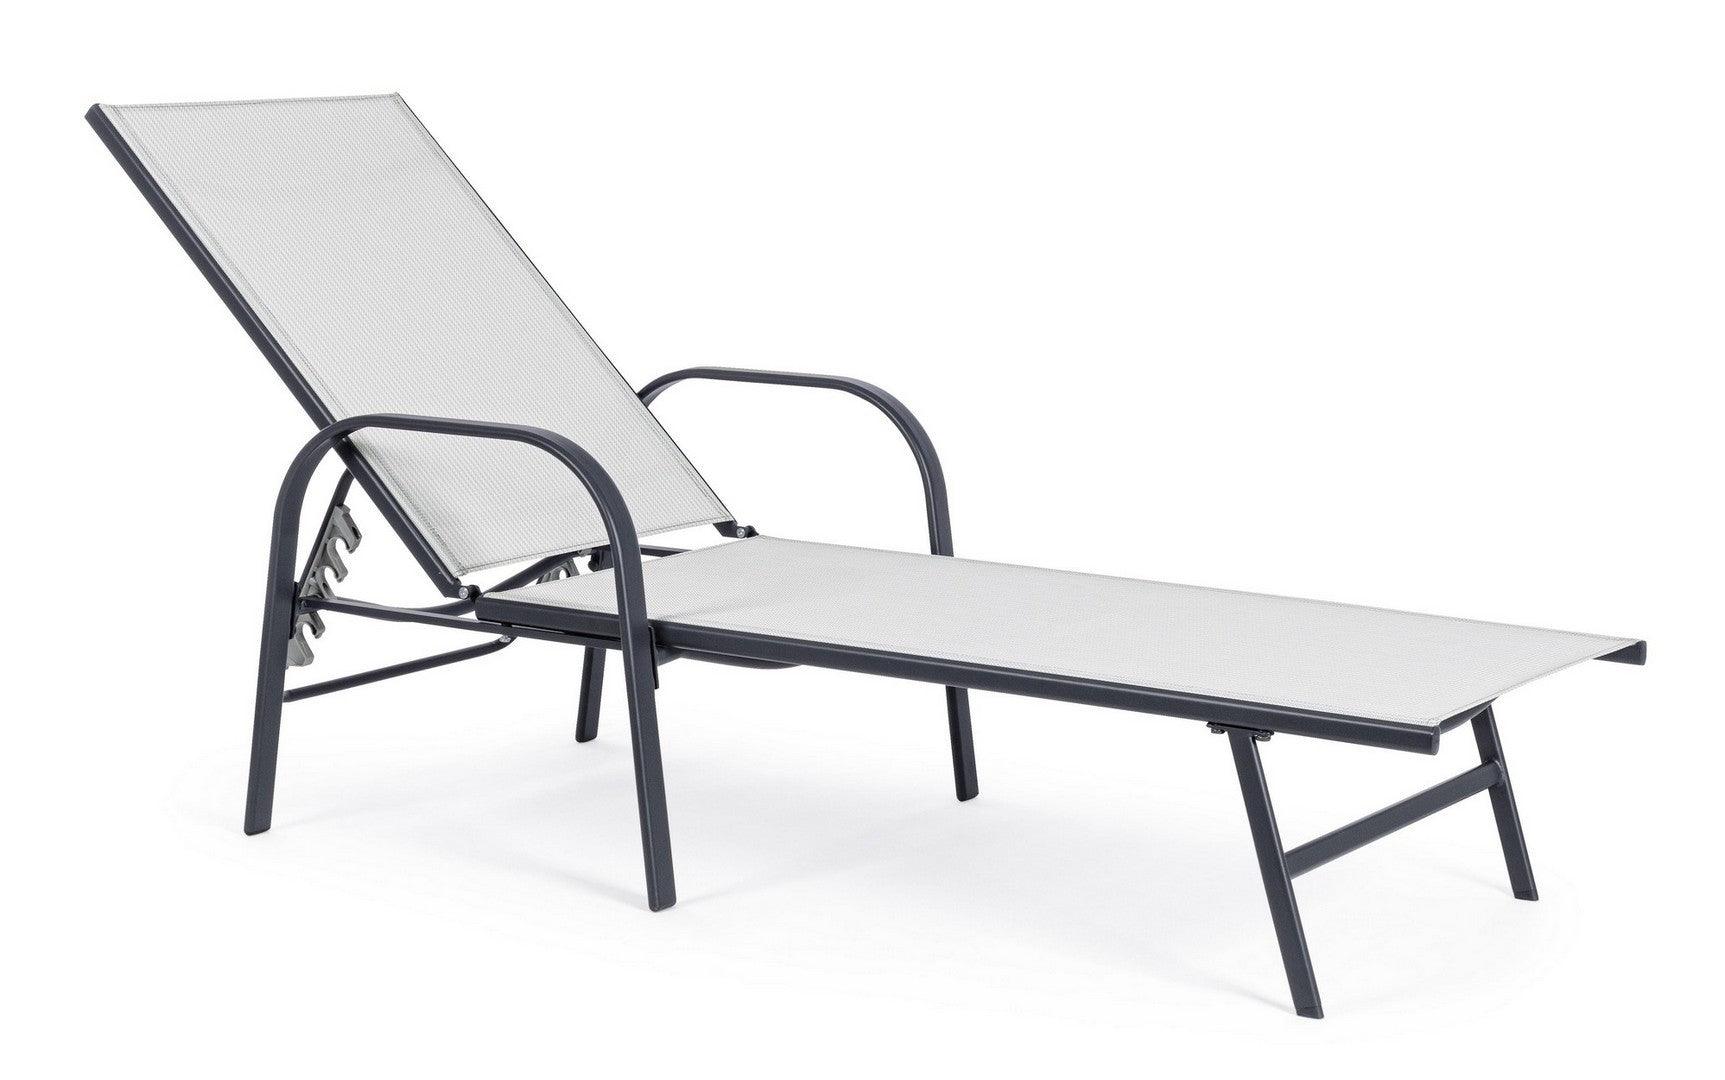 ARENT CHARCOAL JA18 SUNBED WITH ARMRESTS - PARIS14A.RO